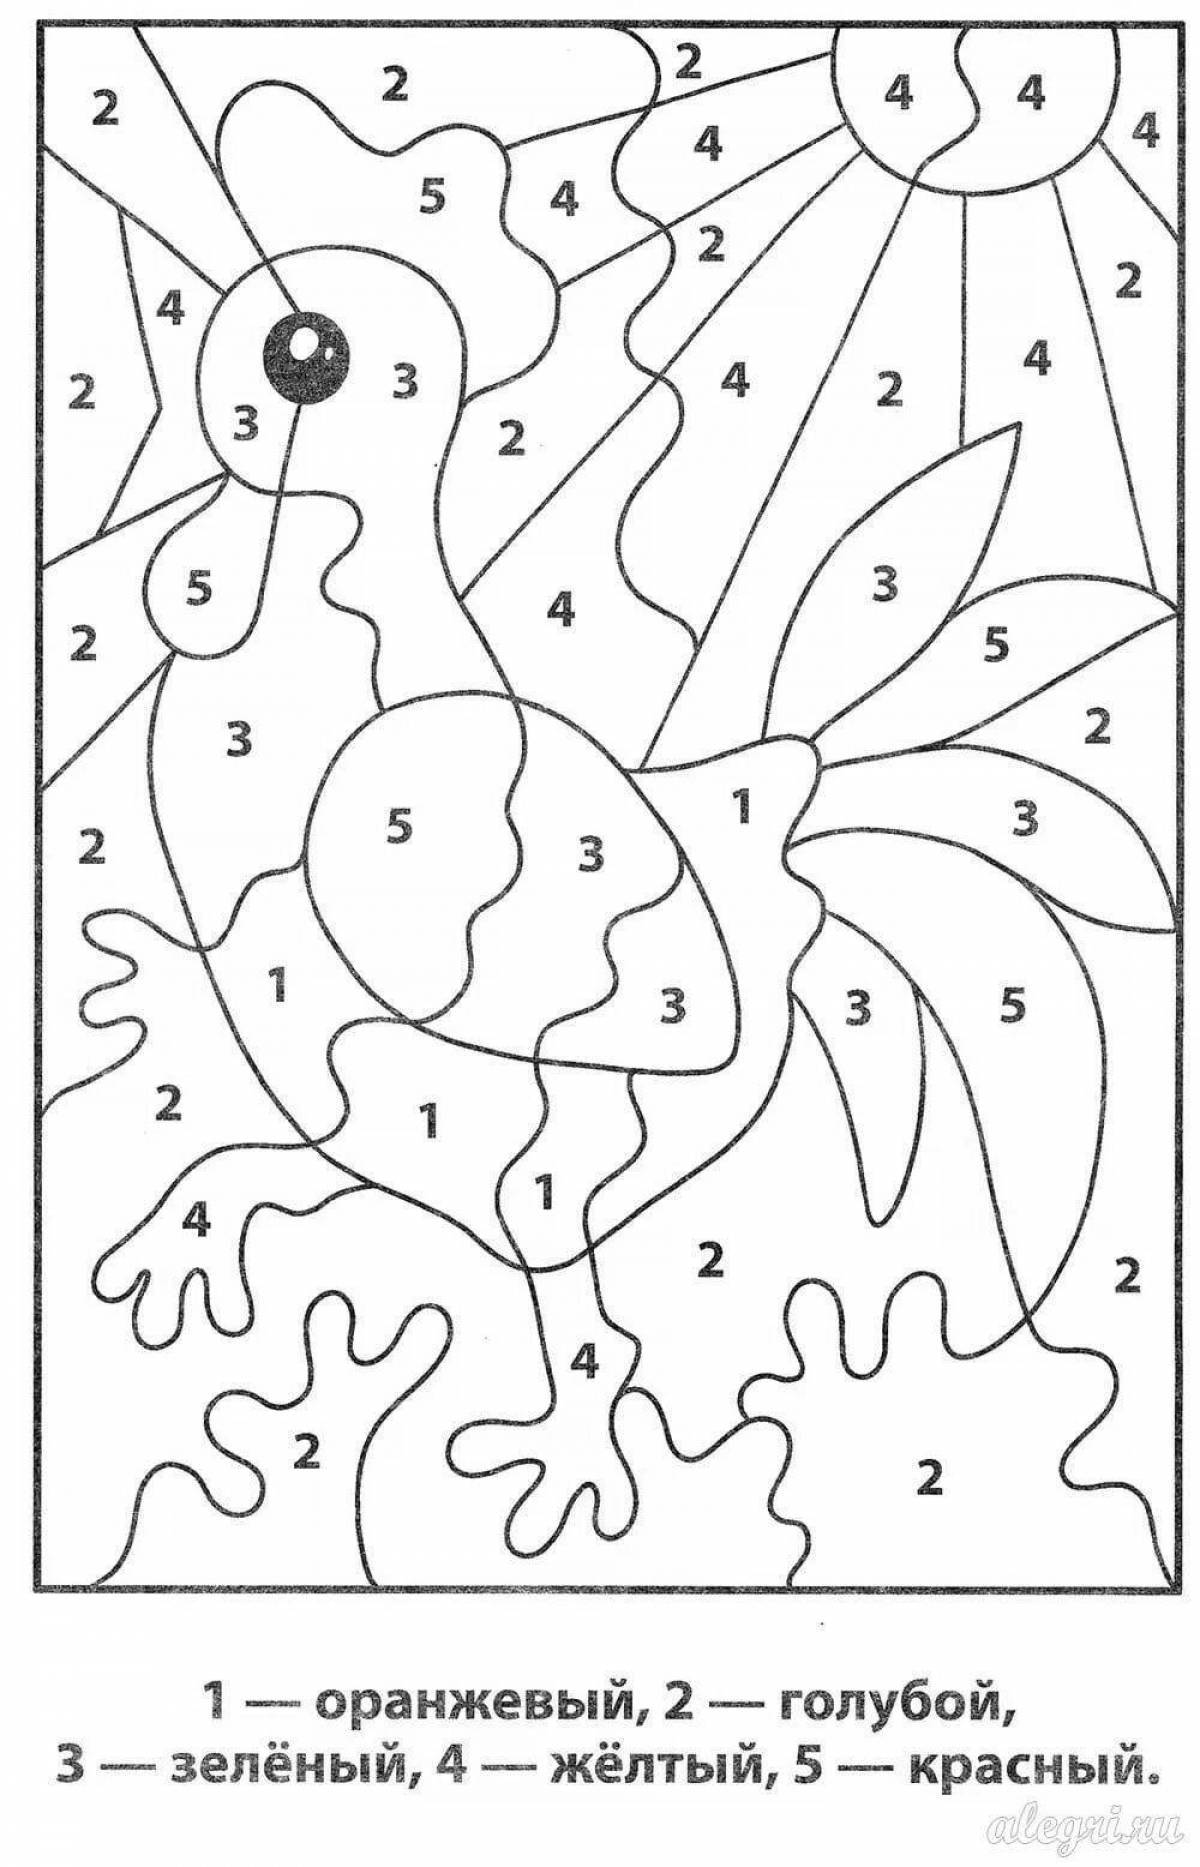 Joyful coloring by numbers up to 10 for preschoolers